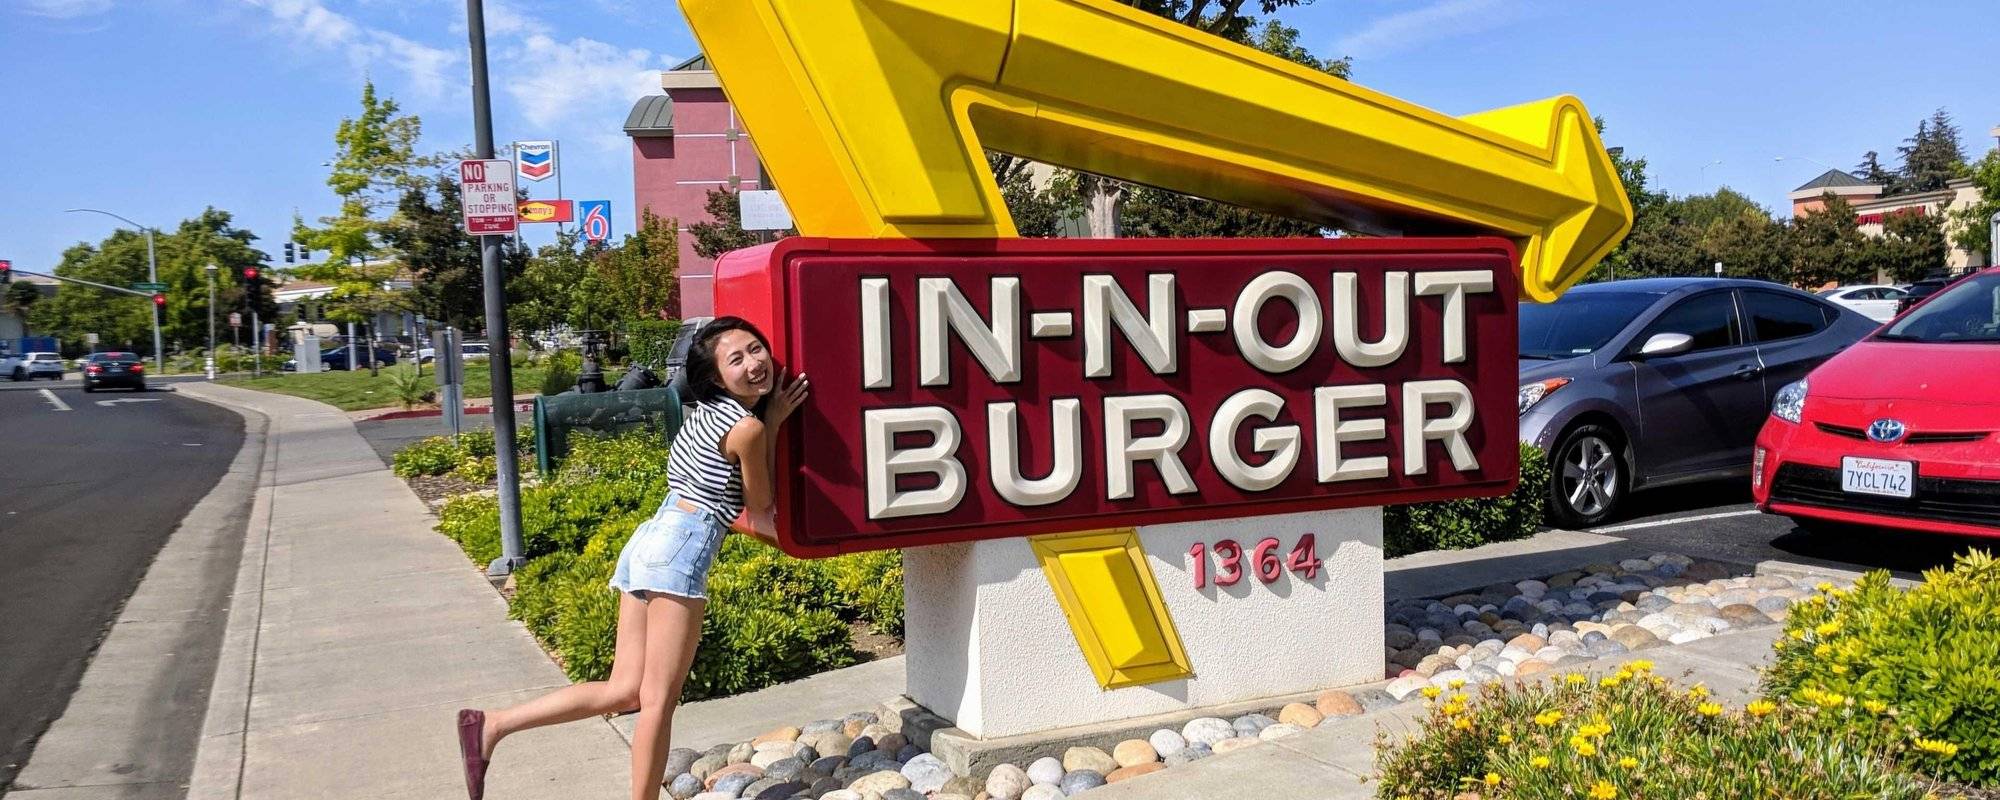 IN-N-OUT Burgers and I have known each other for quite sometimes | We have a bittersweet relationship